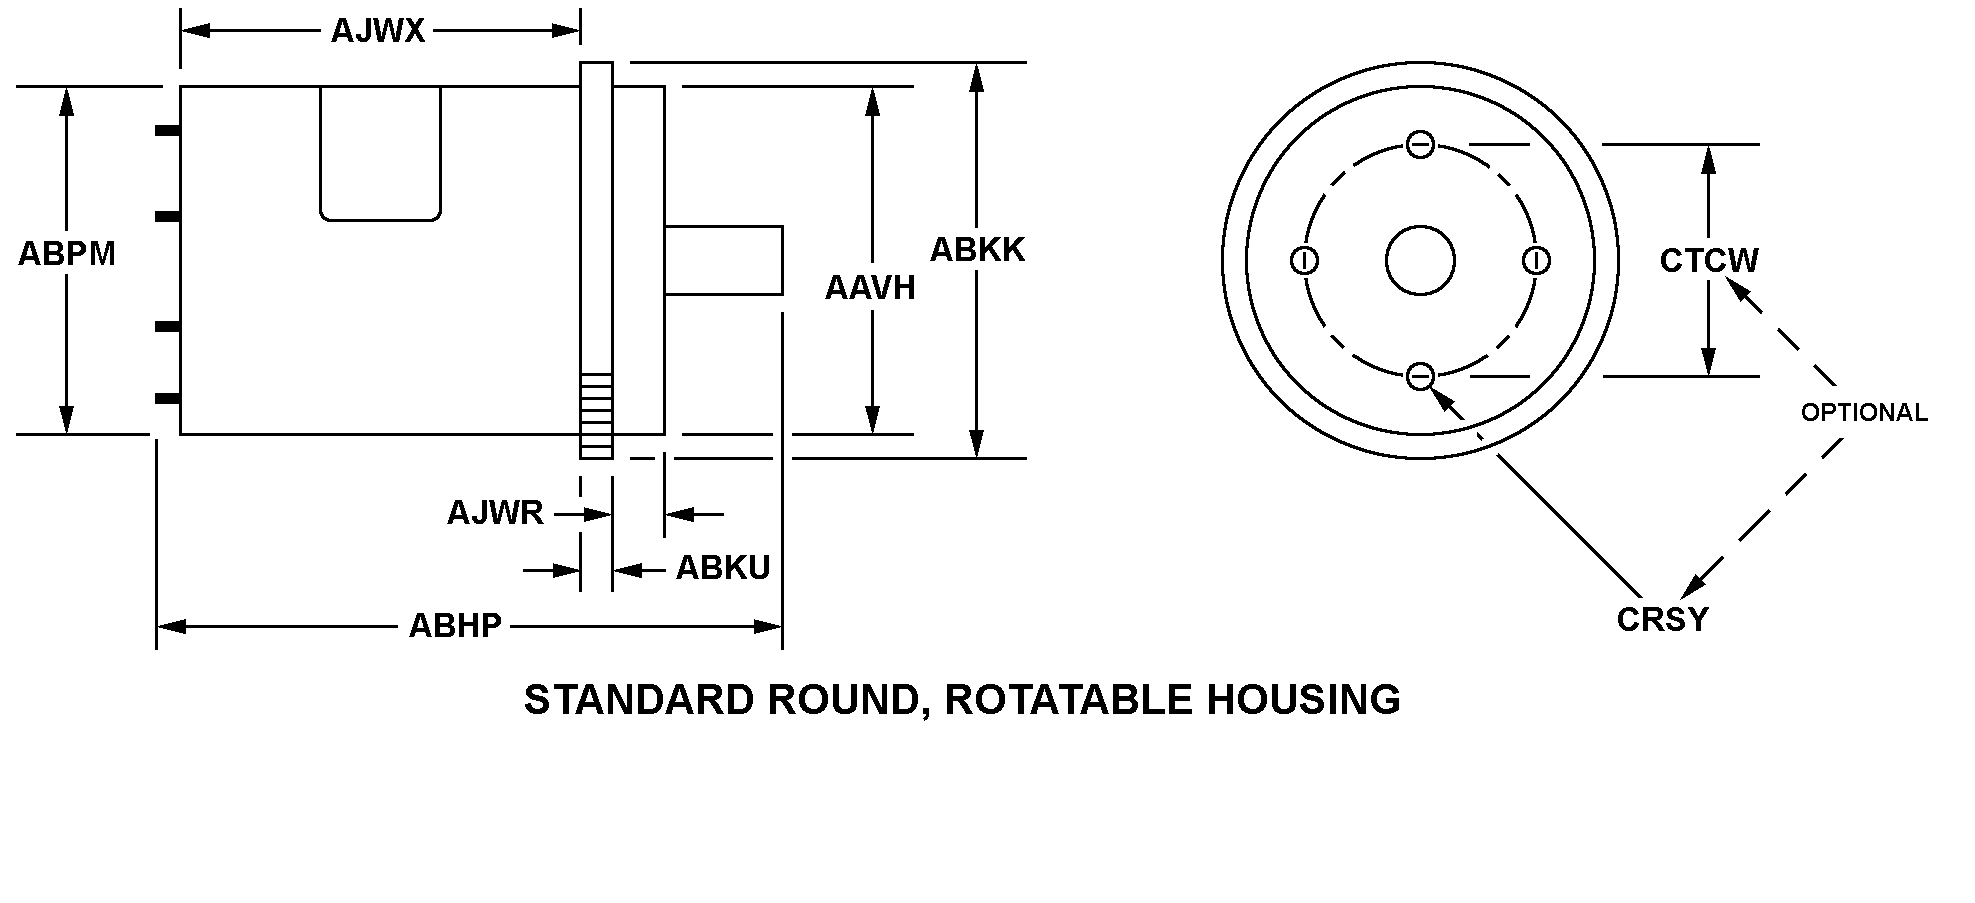 STANDARD ROUND, ROTATABLE HOUSING style nsn 5990-01-126-9279